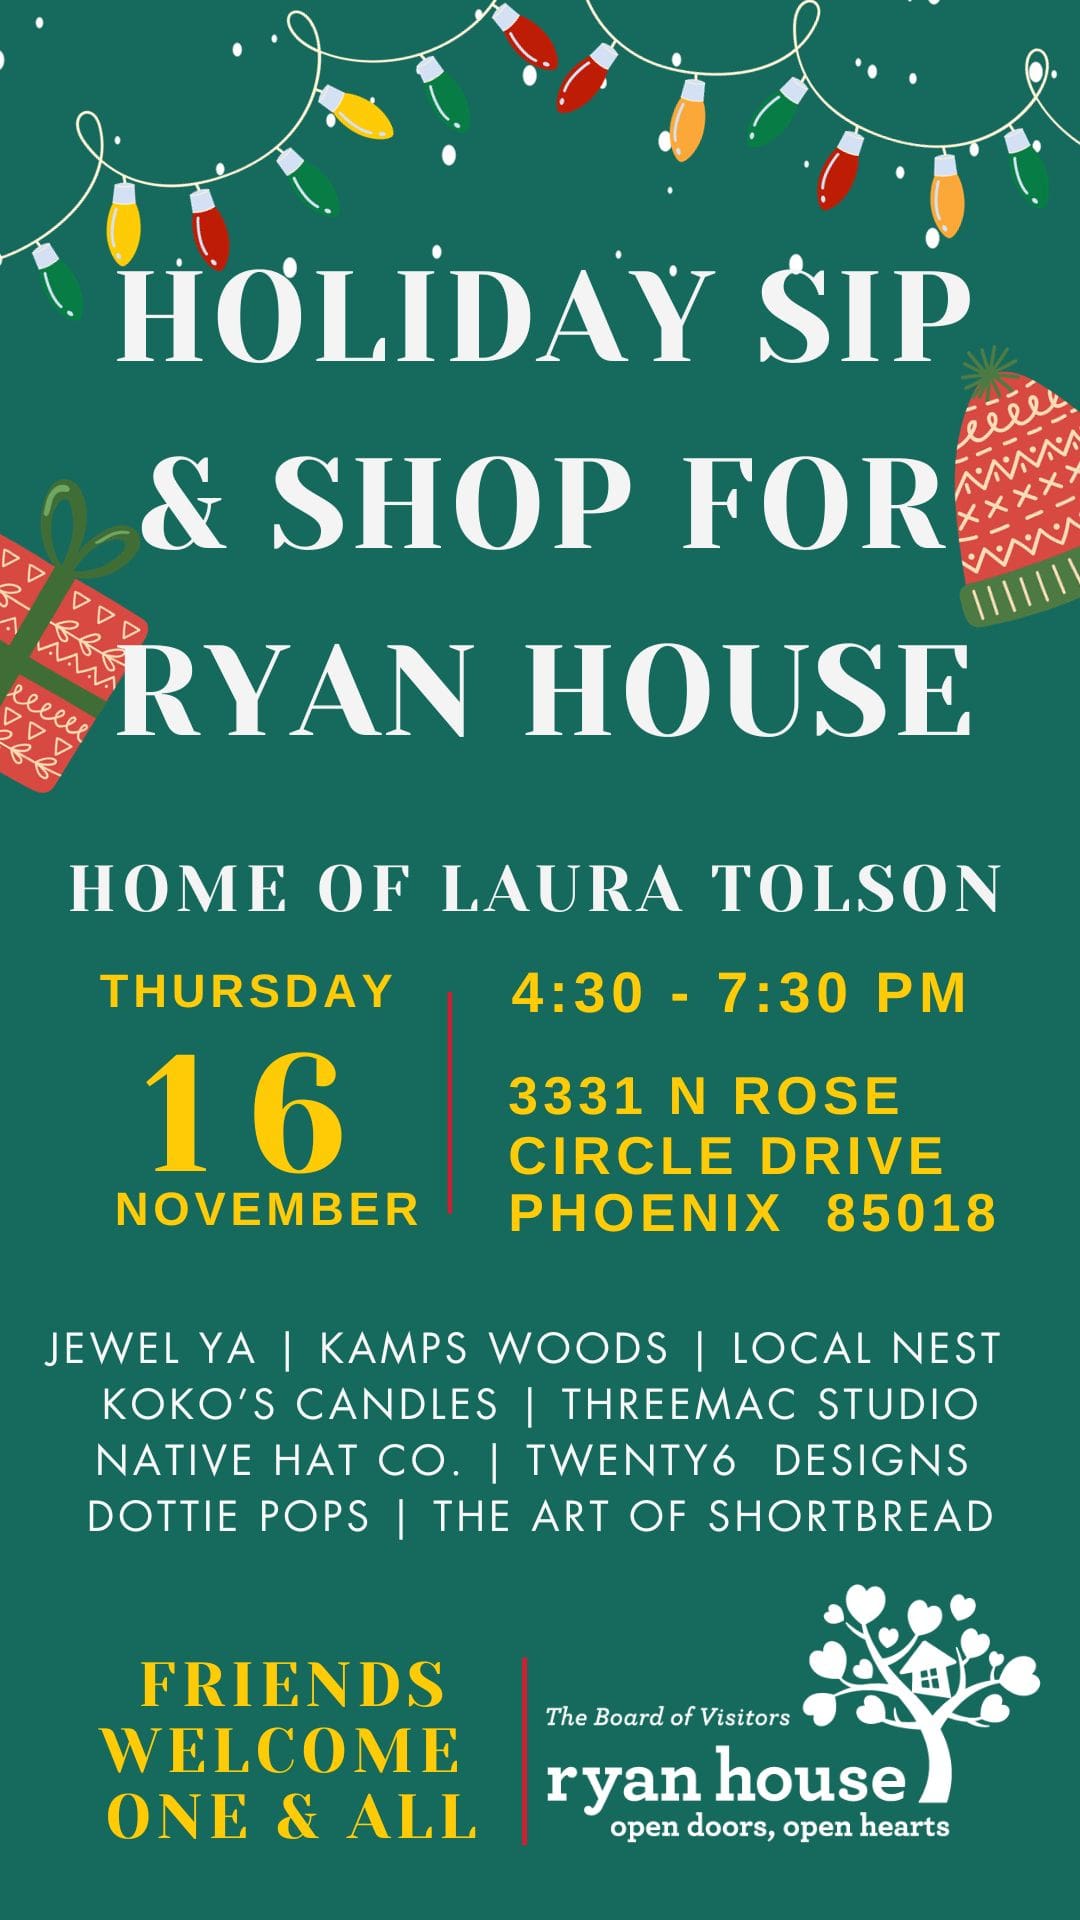 Holiday Sip & Shop for Ryan House